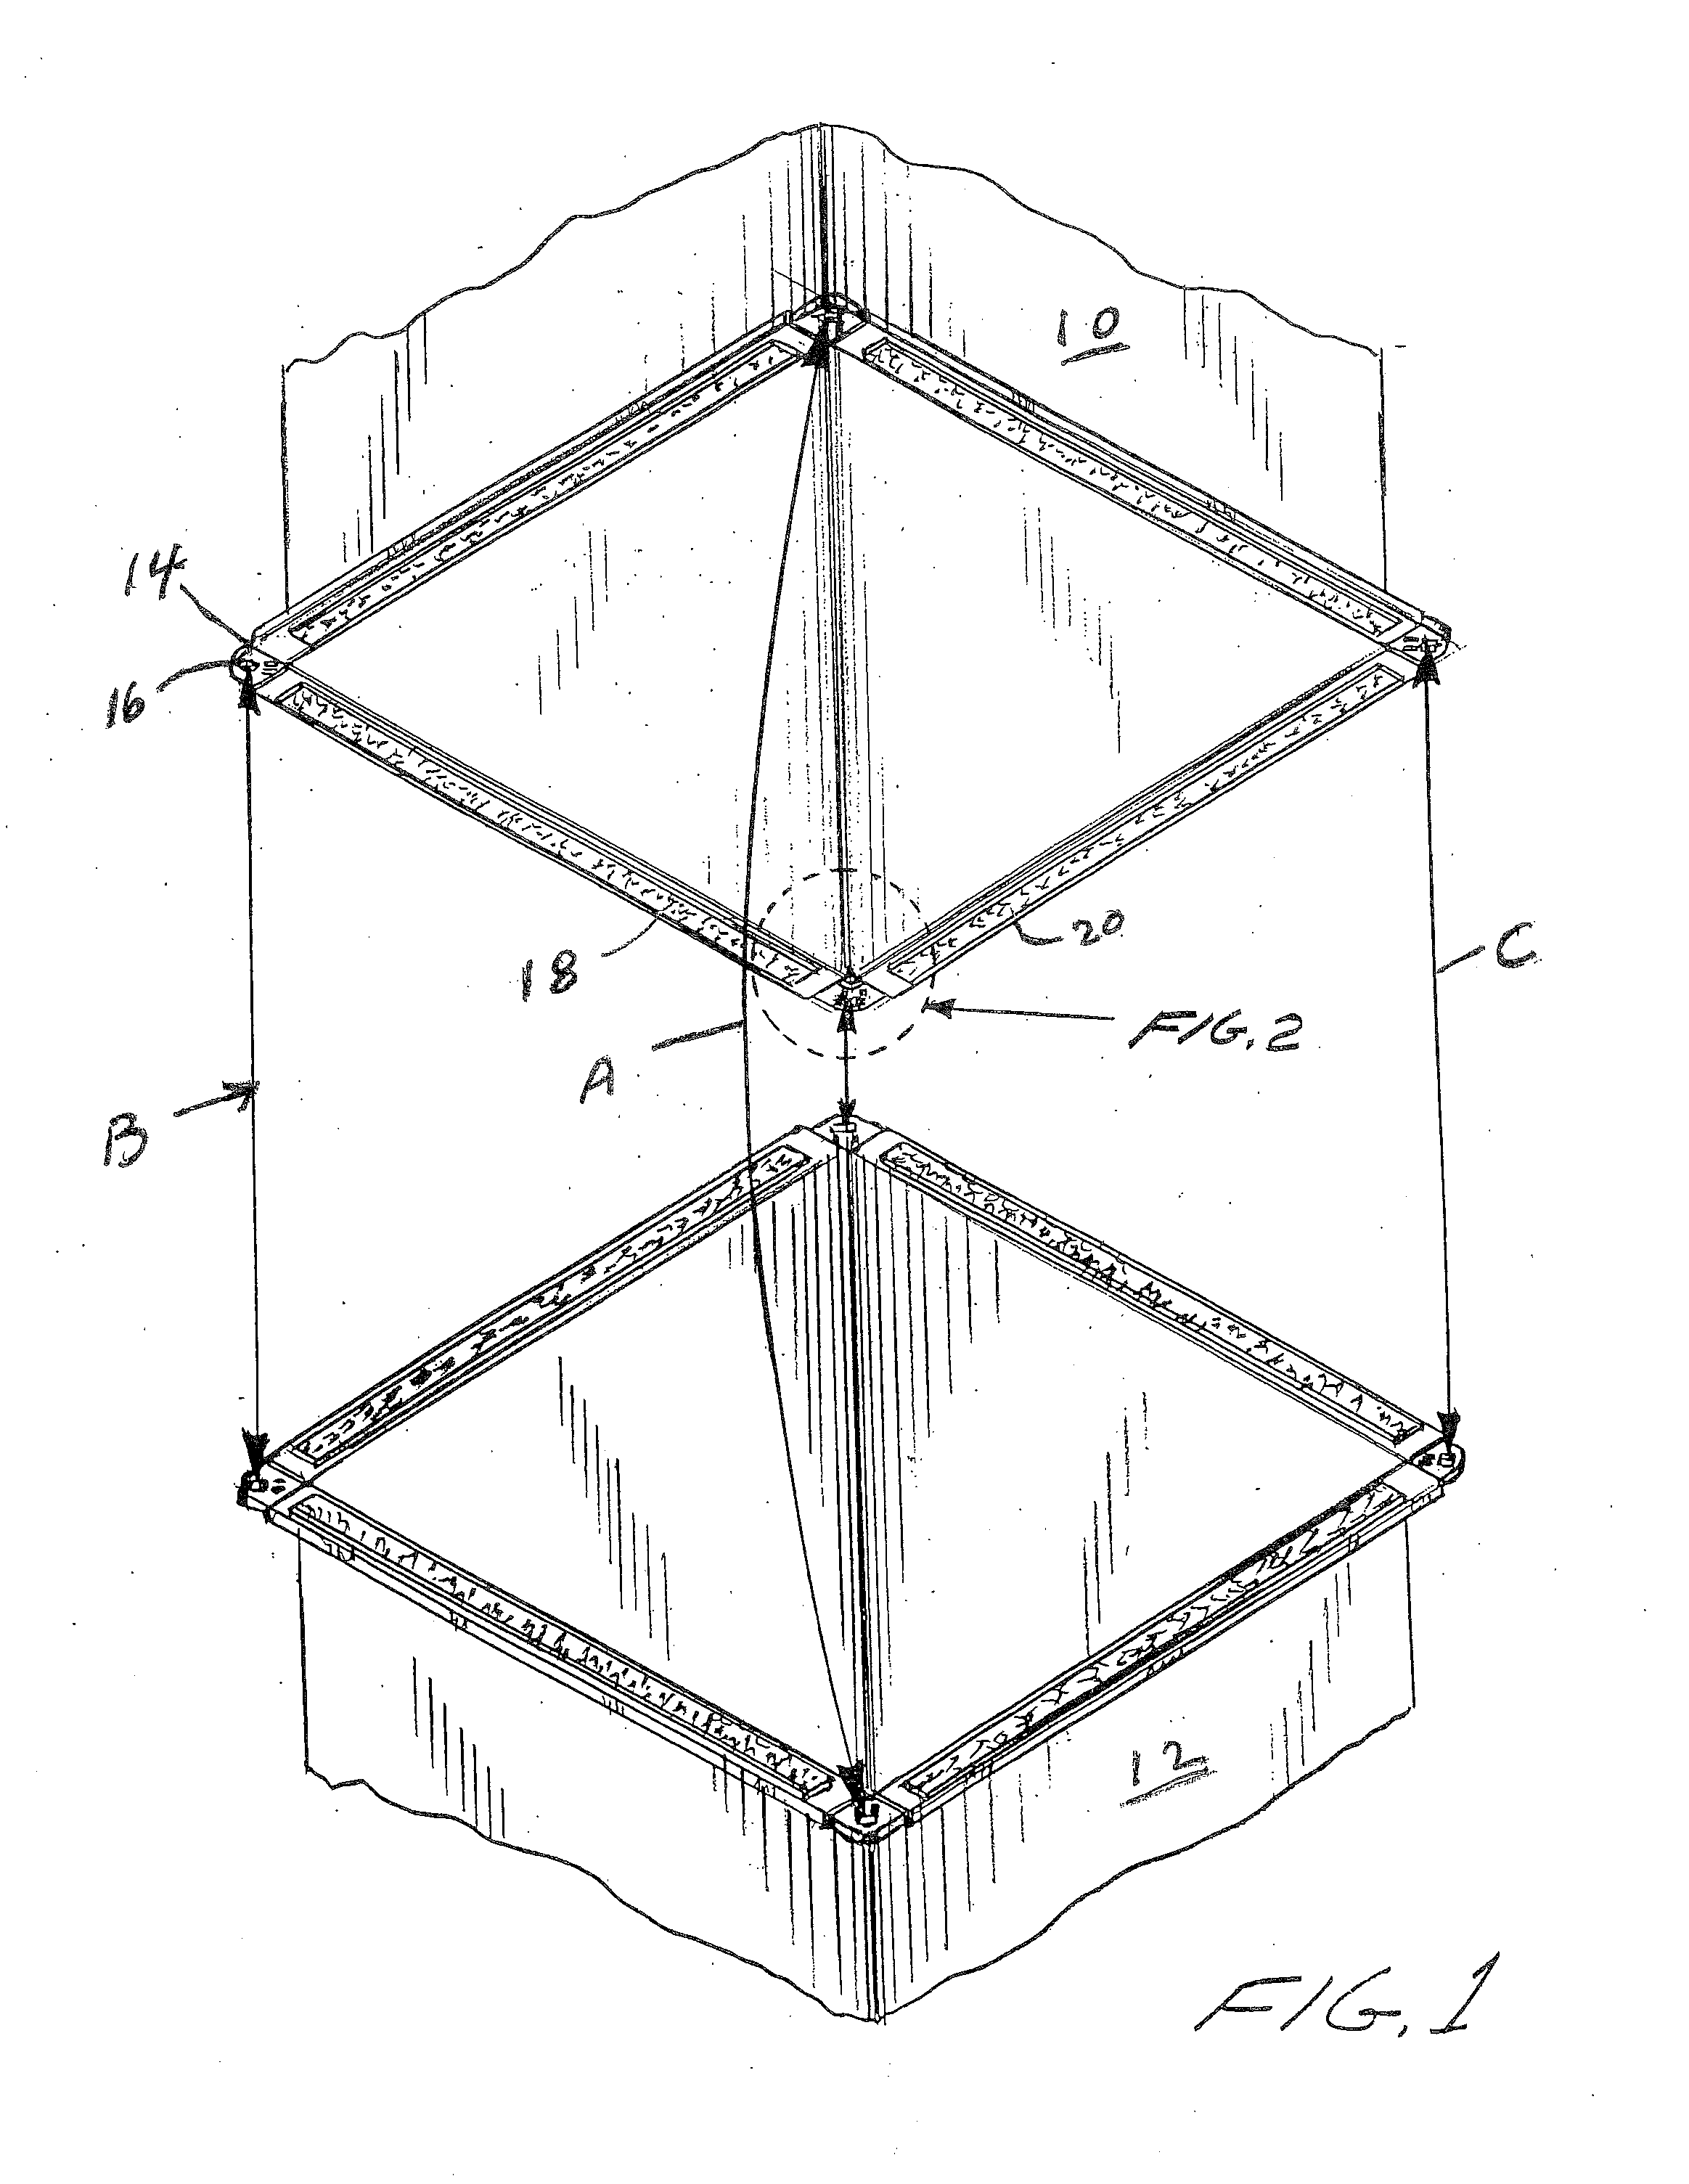 Corner seal device for ductwork for conditioned air and method of assembly of such ductwork to prevent air leaks